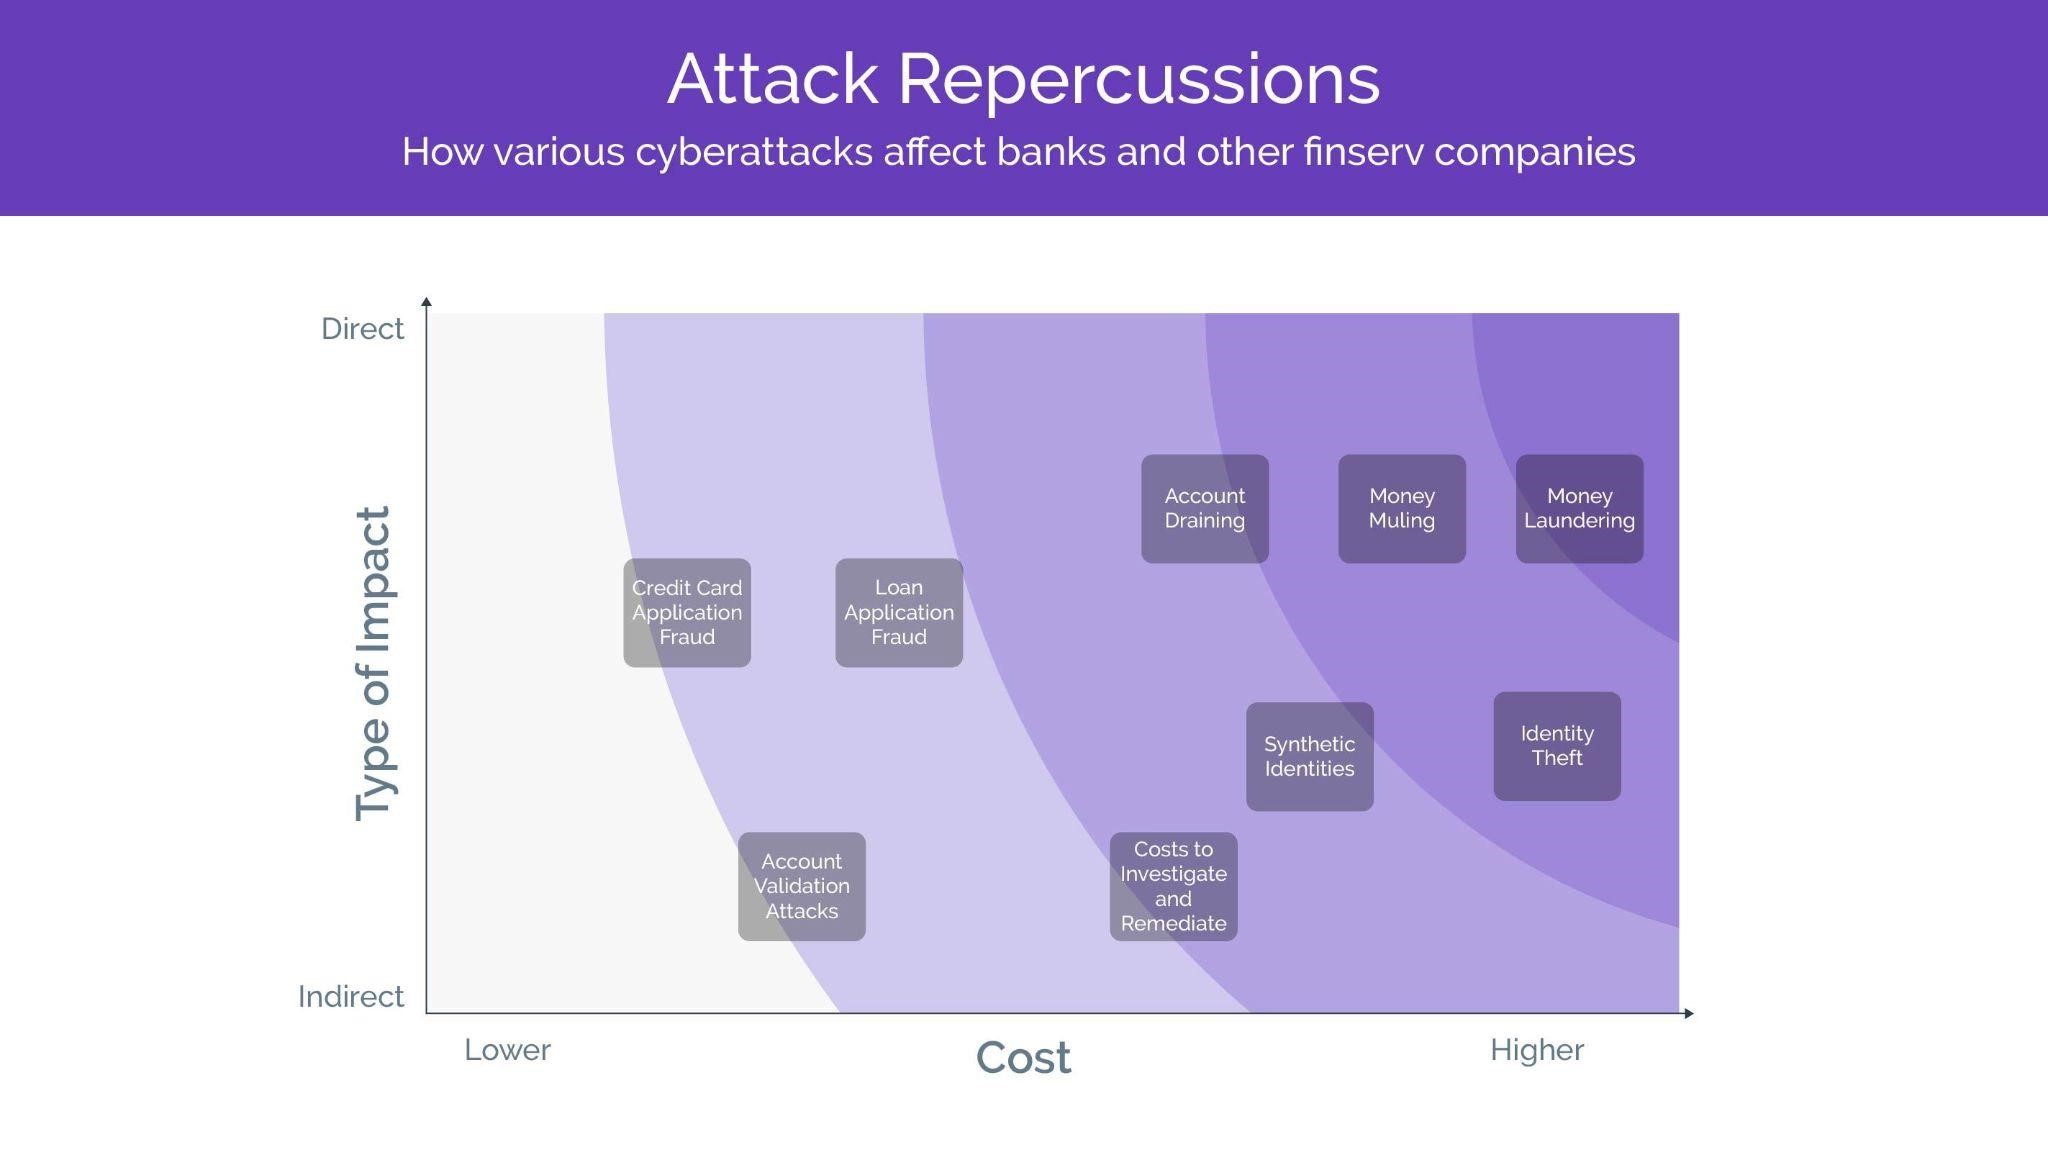 The types and severity of attacks in the banking sector